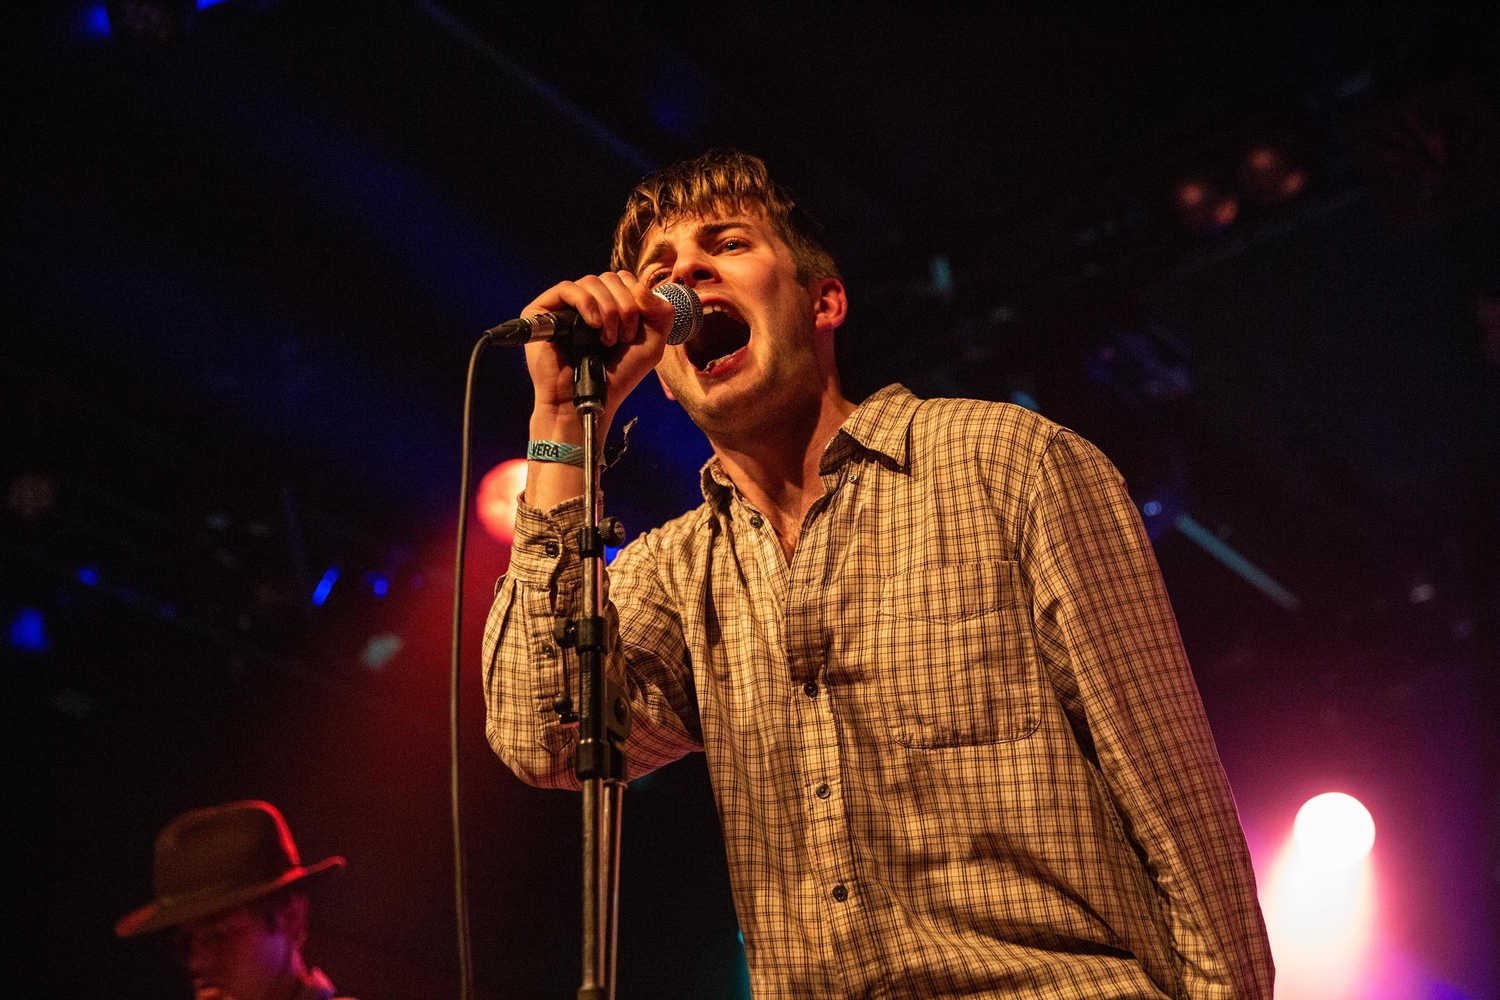 Fontaines DC, Westerman, Viagra Boys and more to play second DIY Presents showcase at SXSW